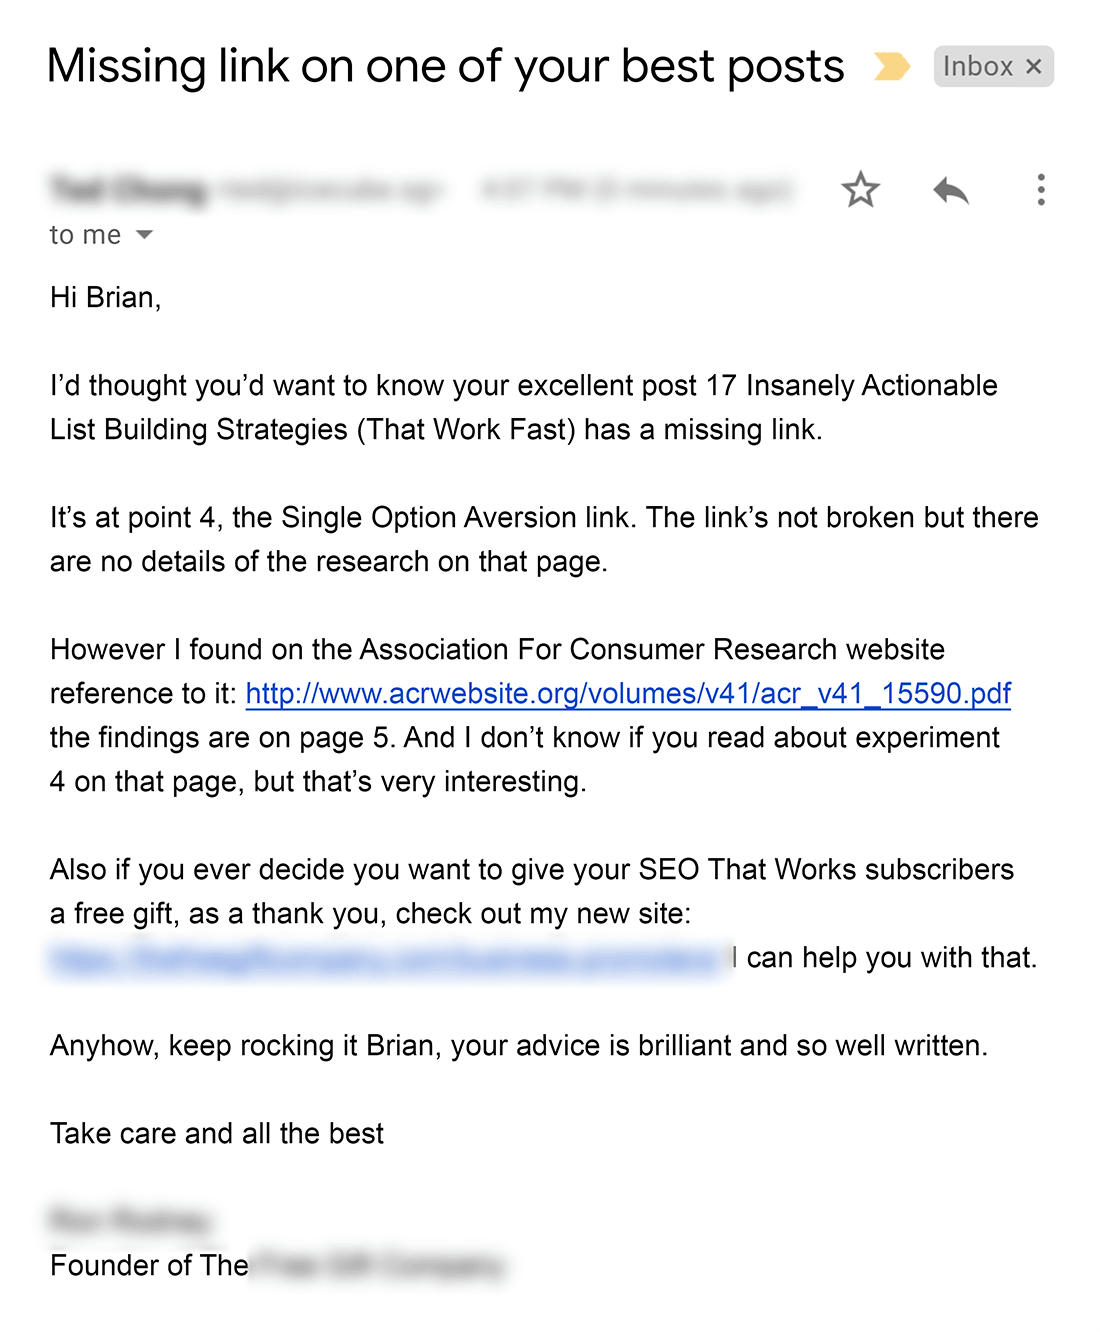 Outreach email with an engaging subject line